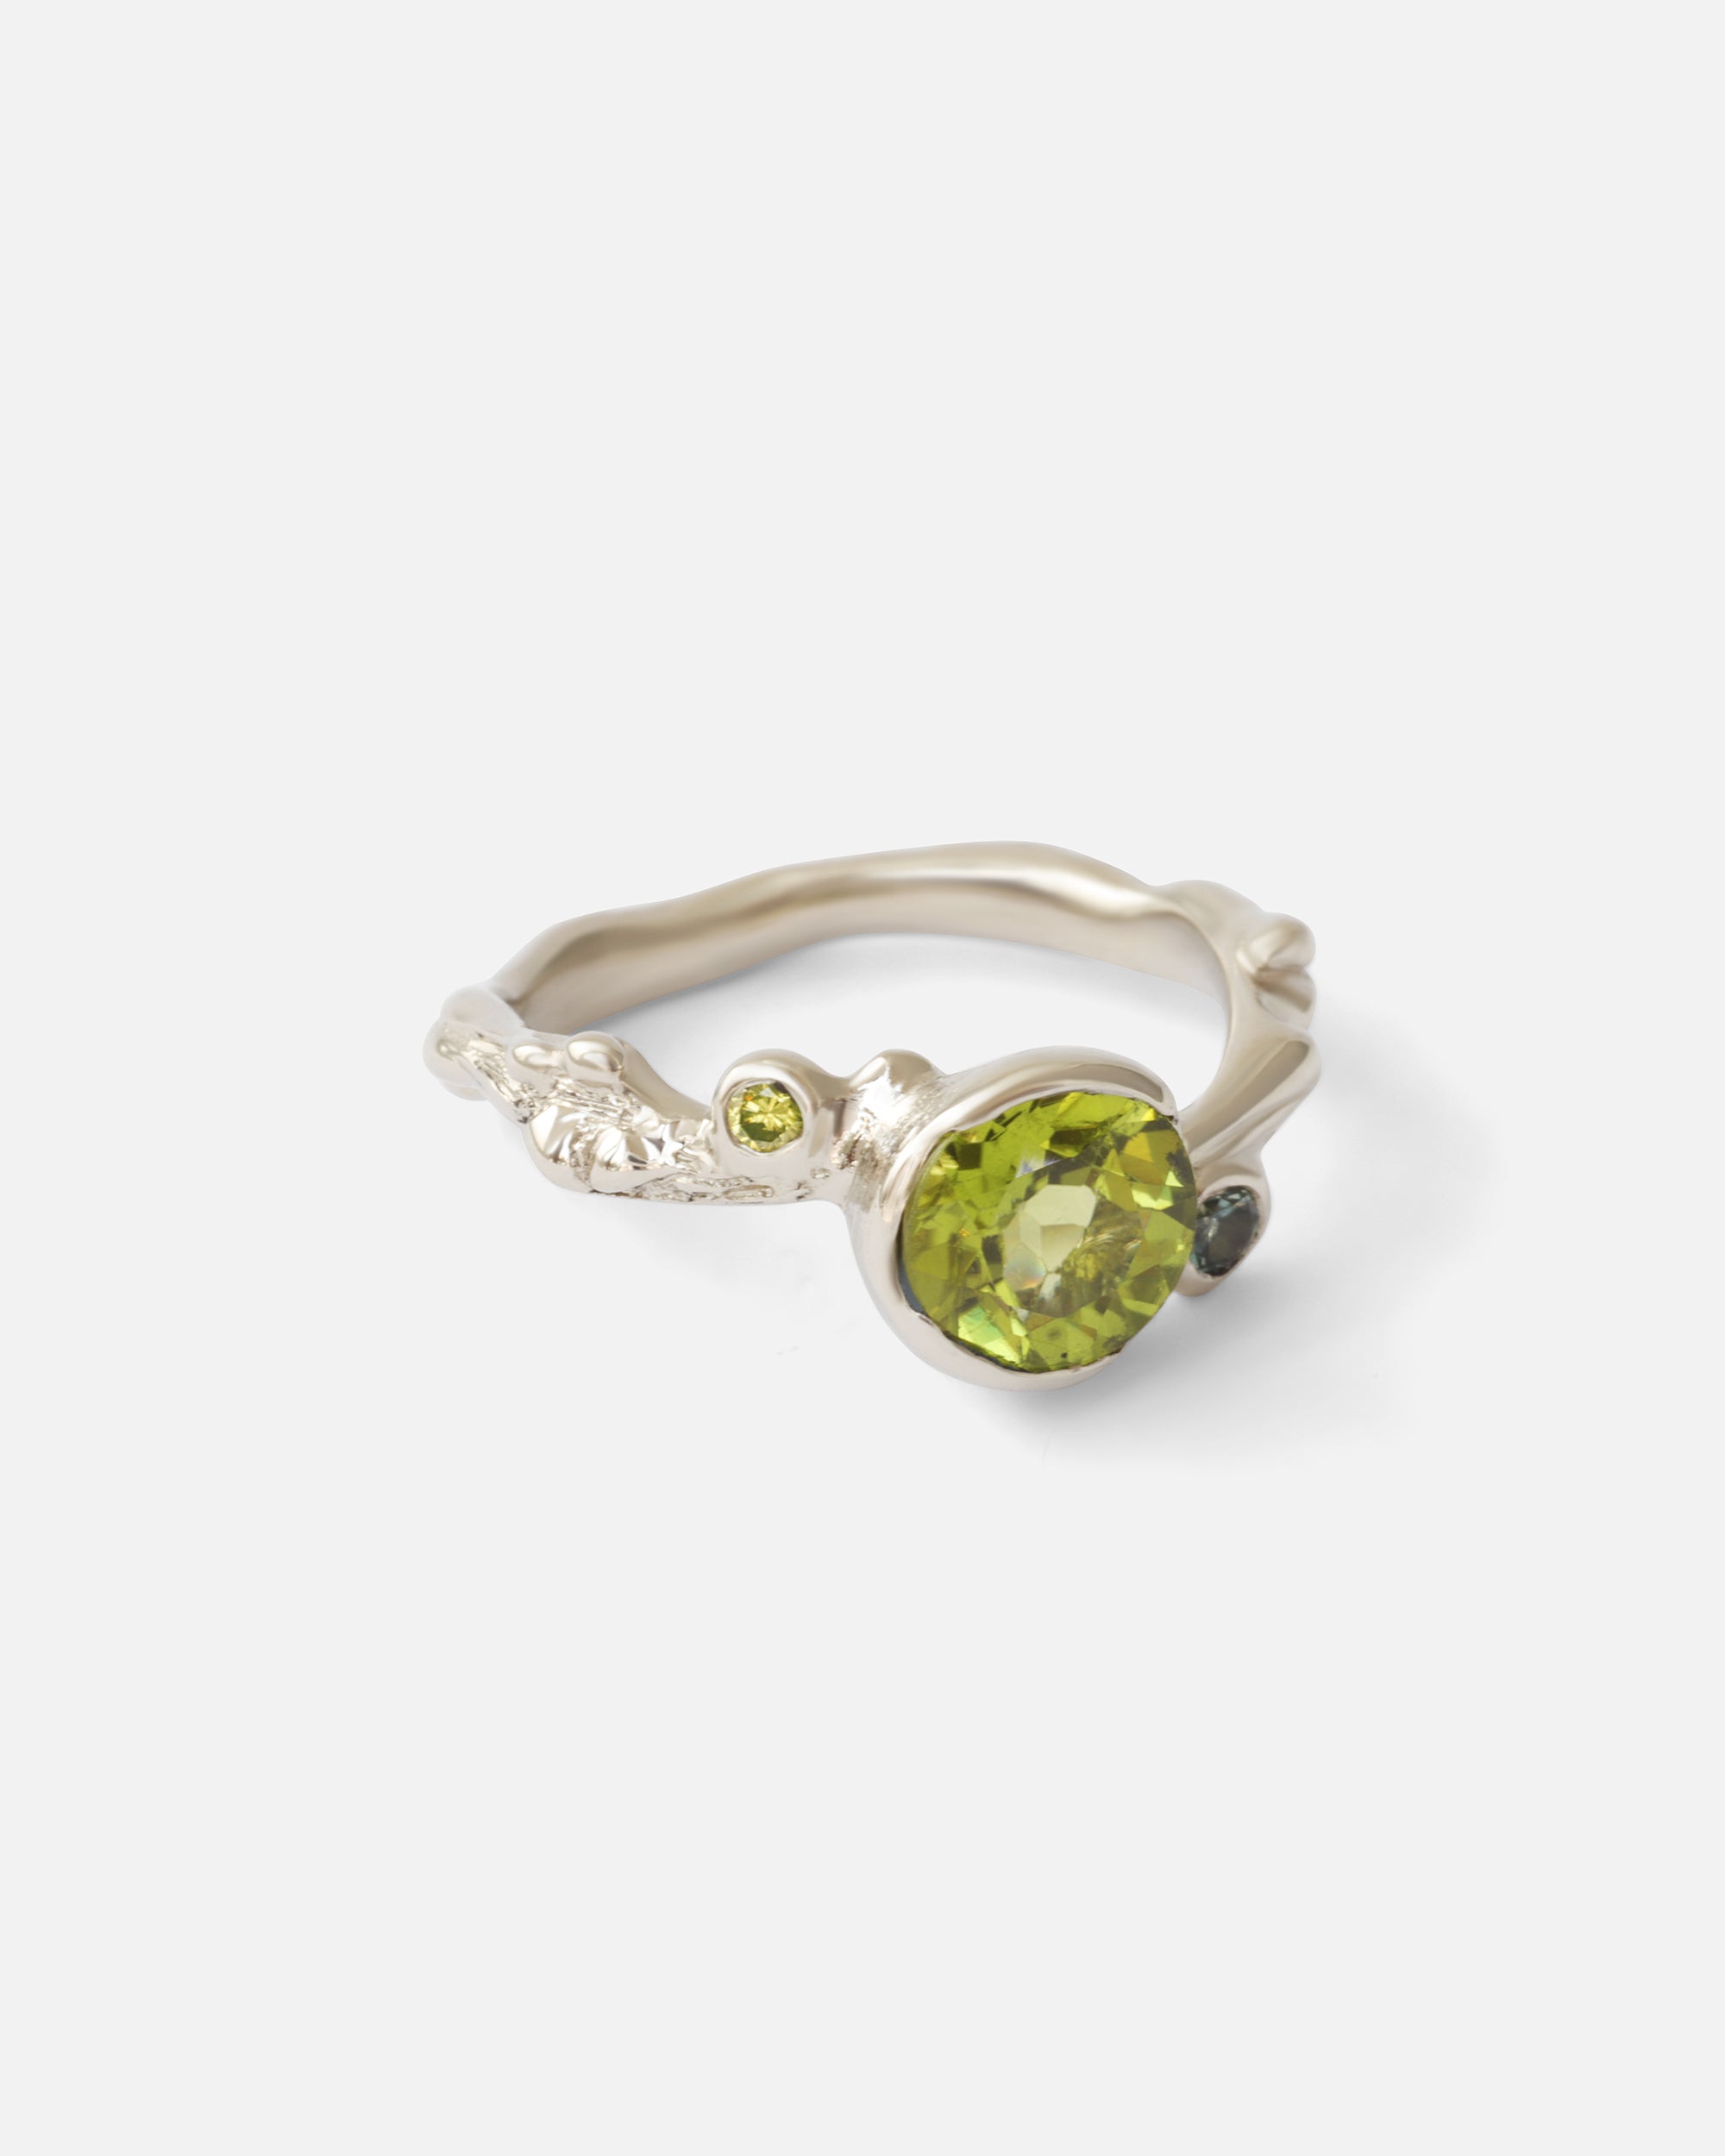 Larch Ring / Bloom By Young Sun Song in rings Category